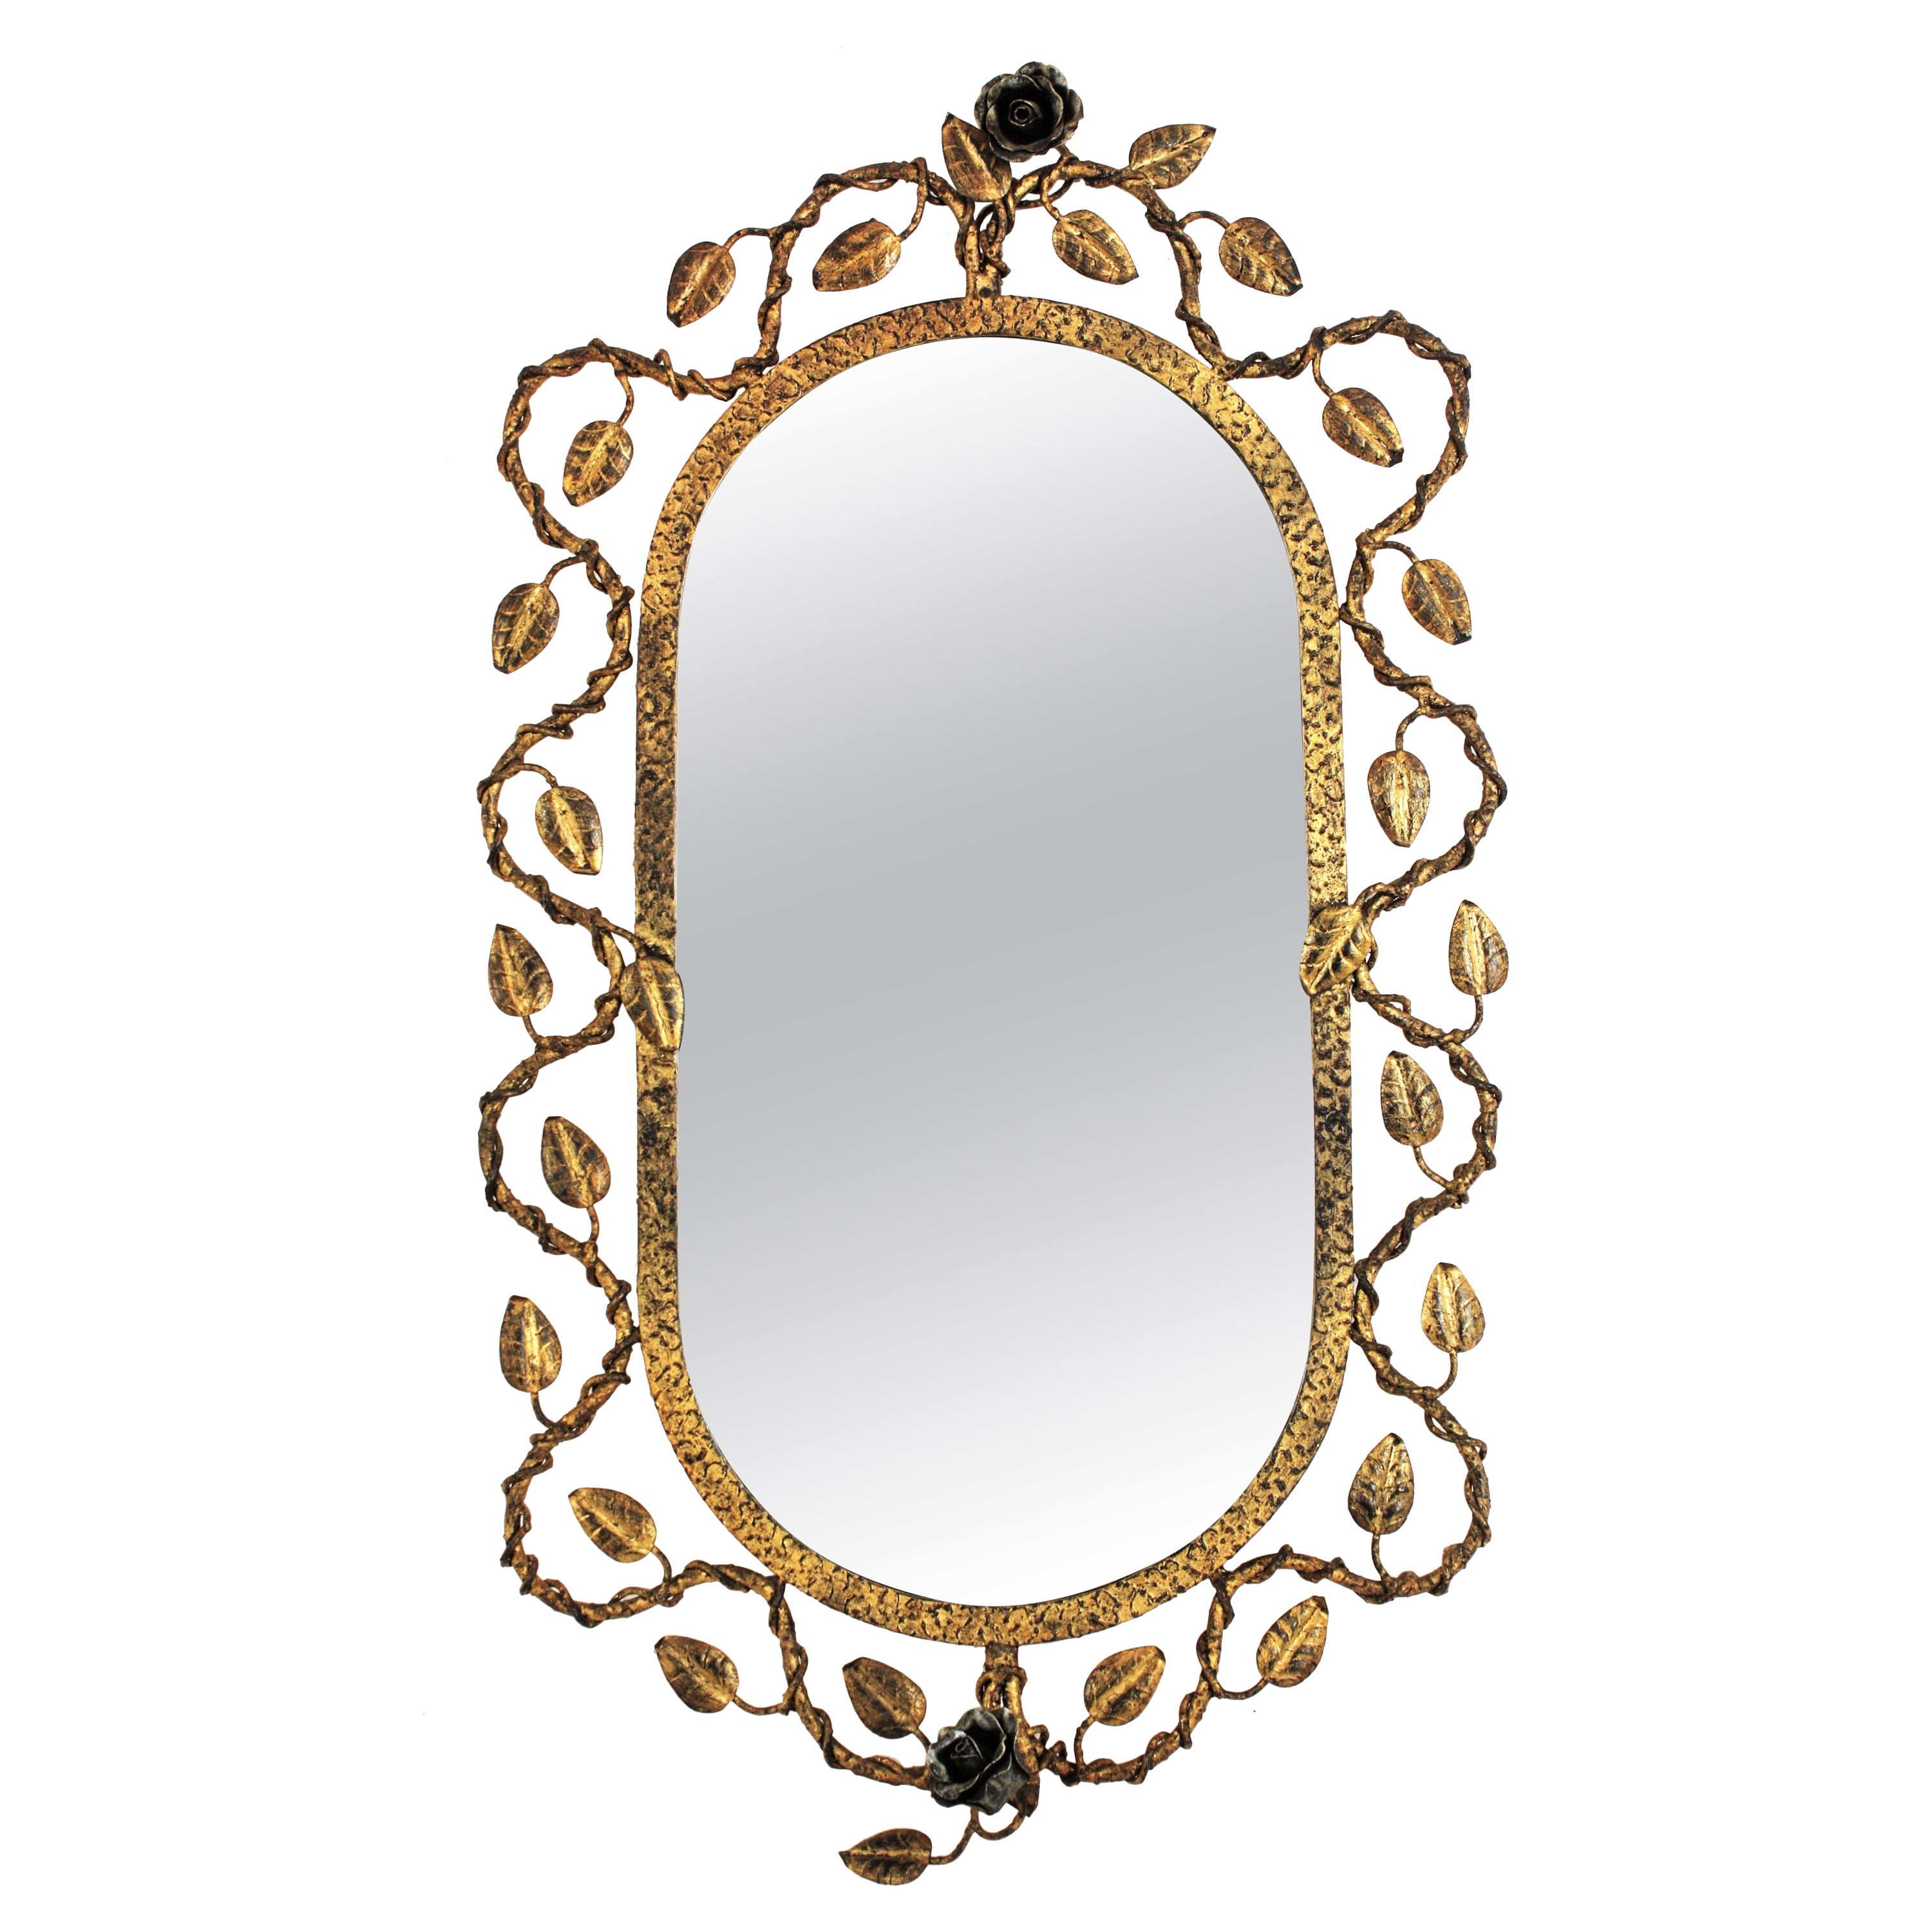 Oval Mirror in Gilt Iron with Foliage Floral Motifs